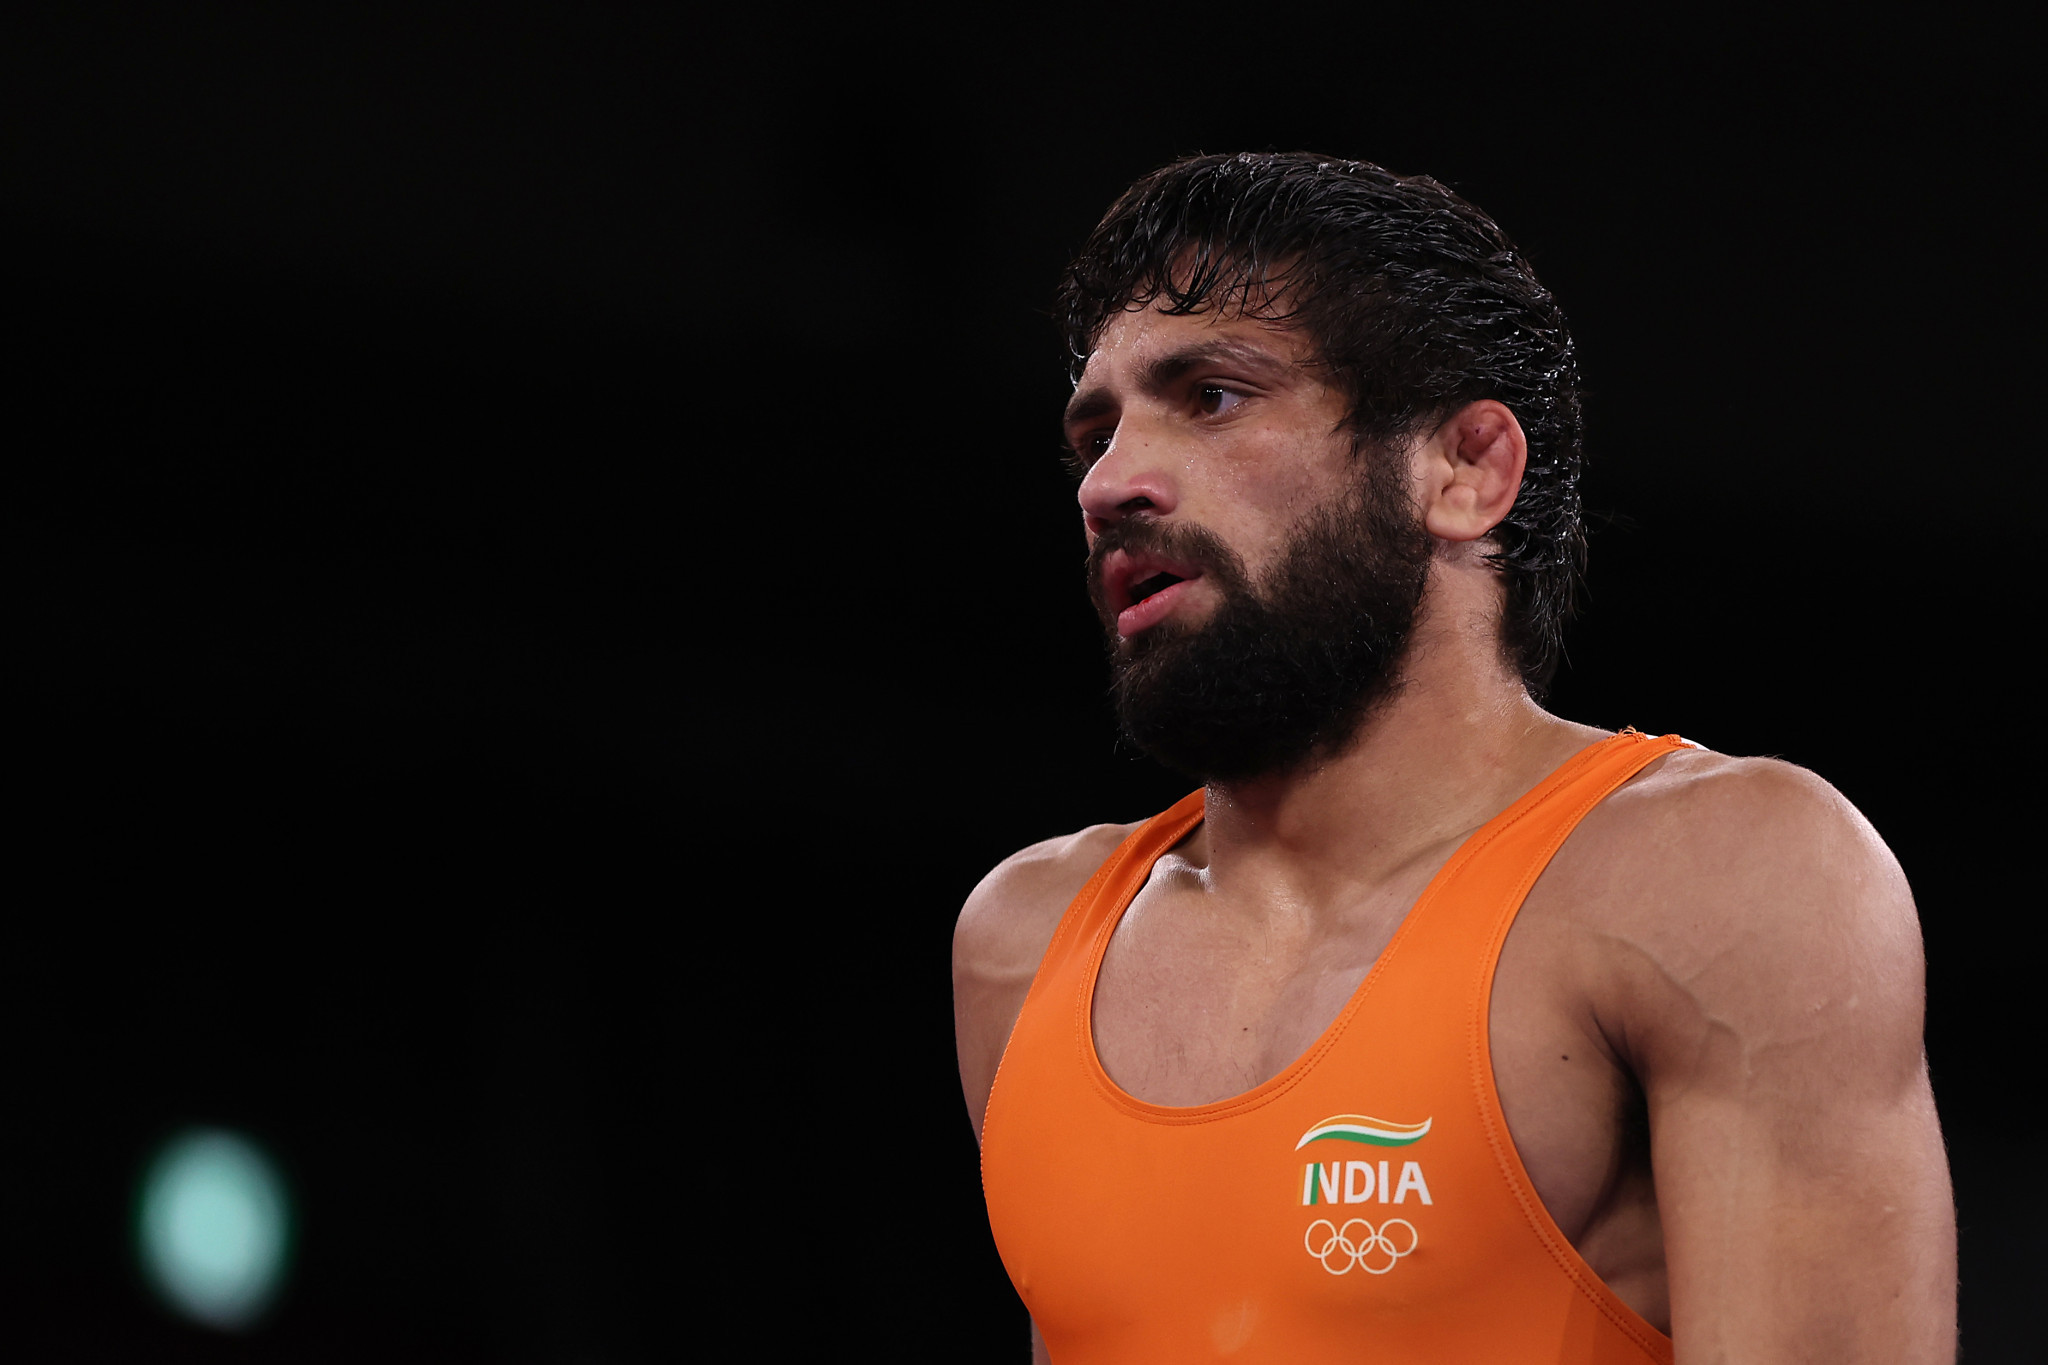 Handful of Olympic medallists set to compete at Asian Wrestling Championships